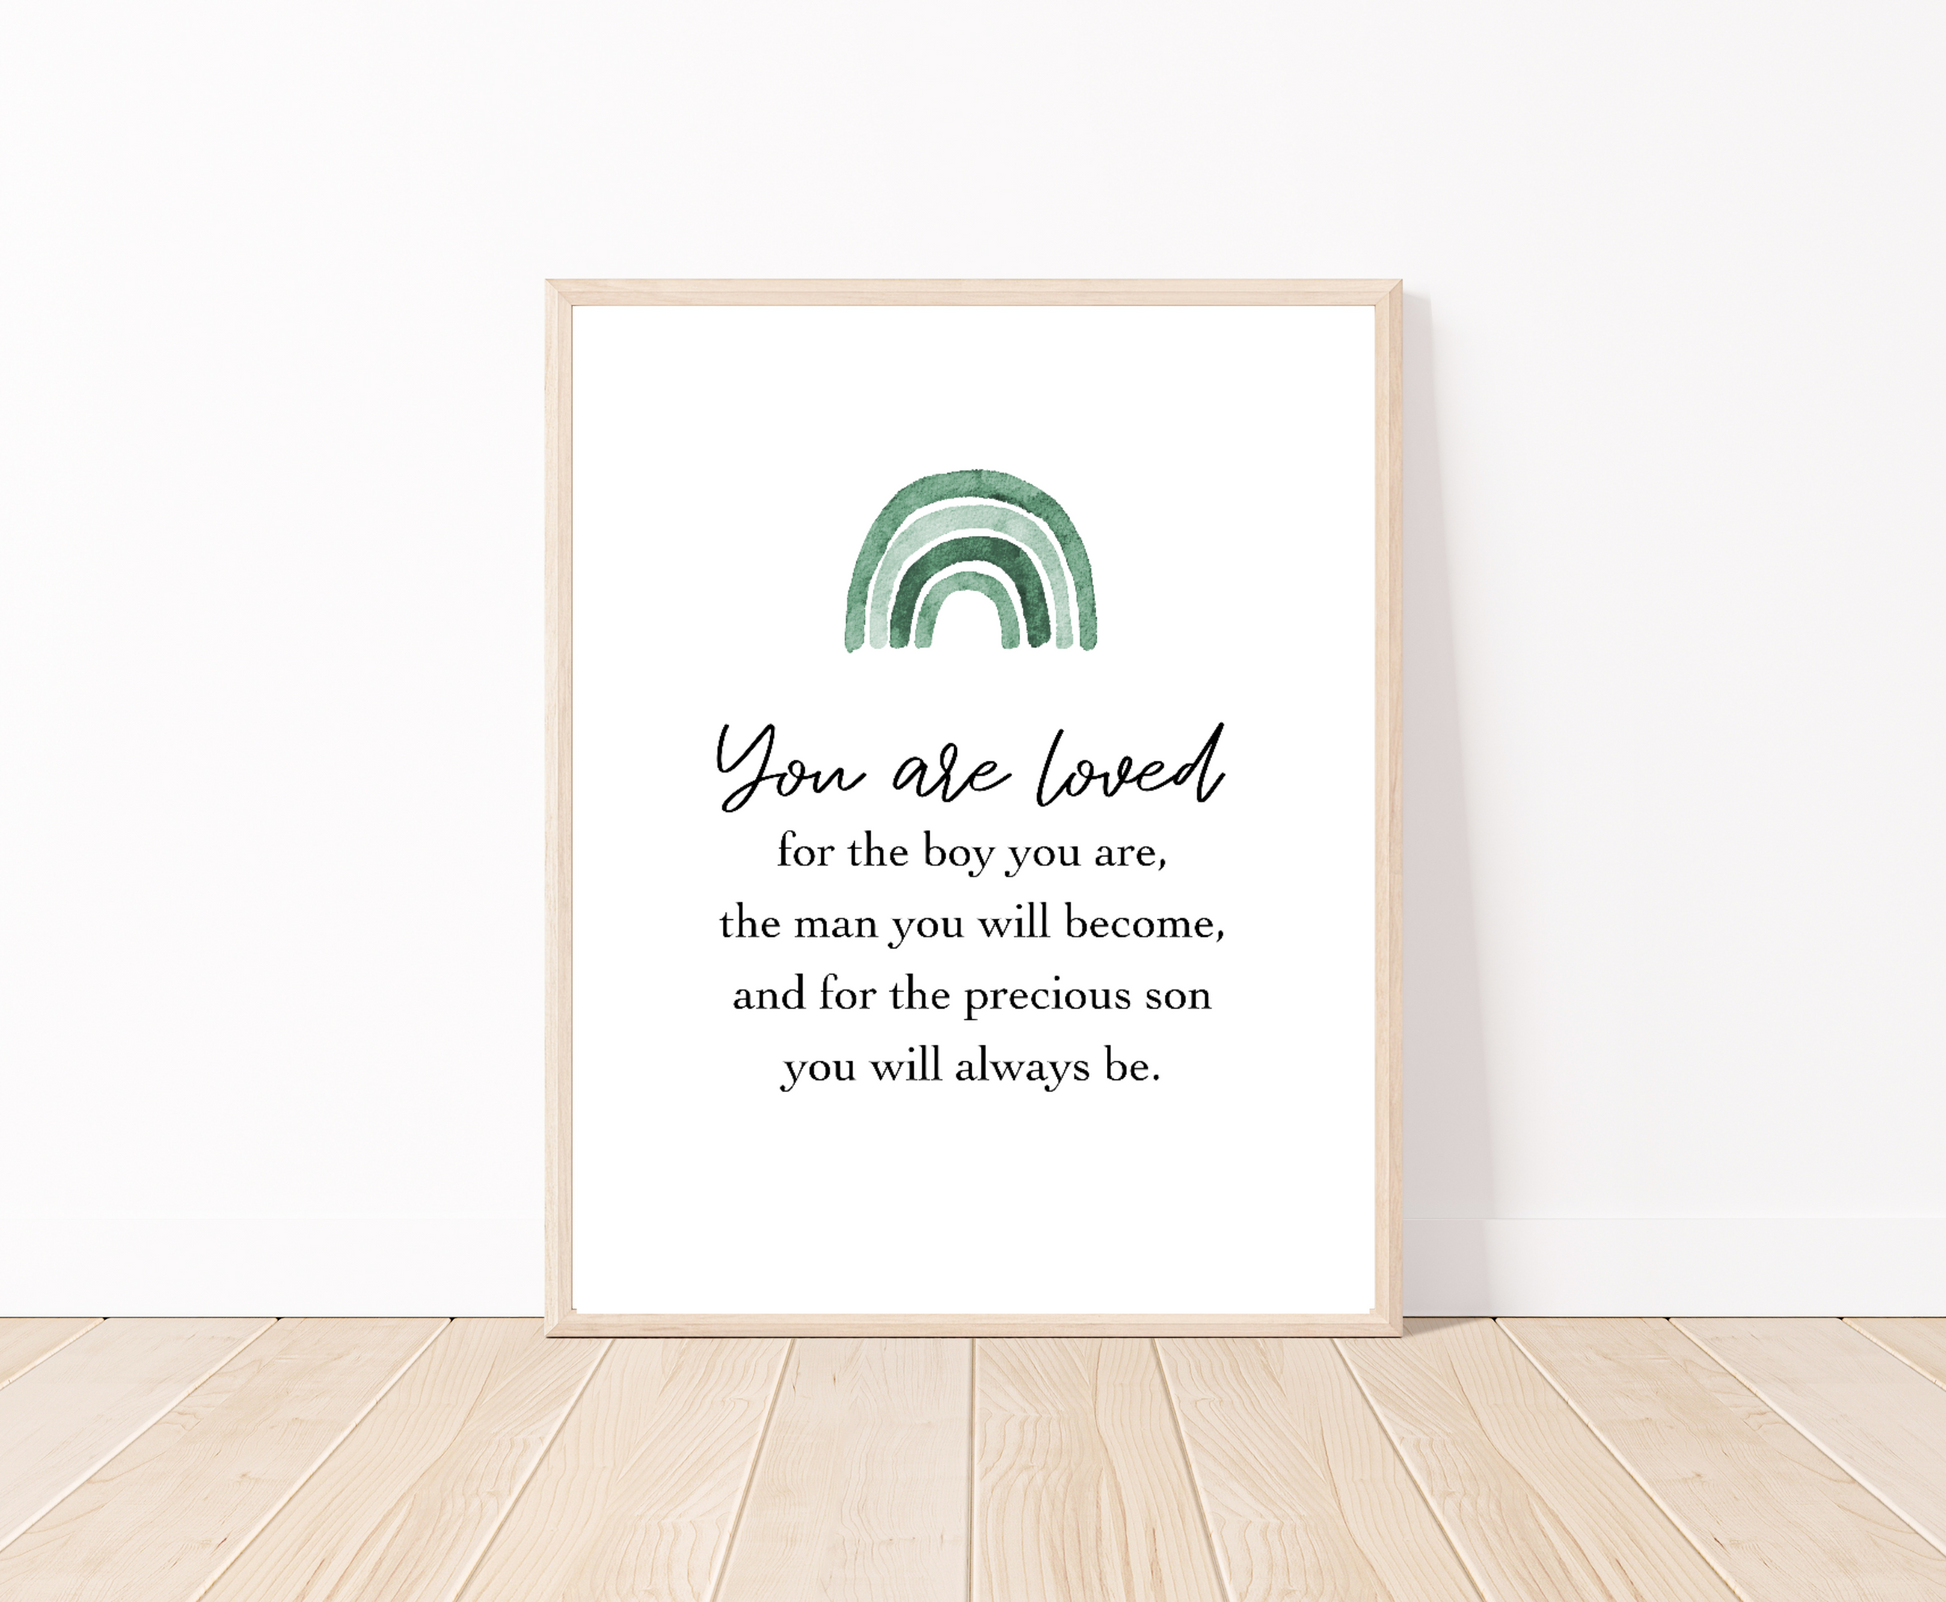 A frame placed on the floor showing a graphic for a little boy’s room that has an ombre green rainbow design and includes the following “You are loved, for the boy you are, the man you will become, and for the precious son you will always be”.